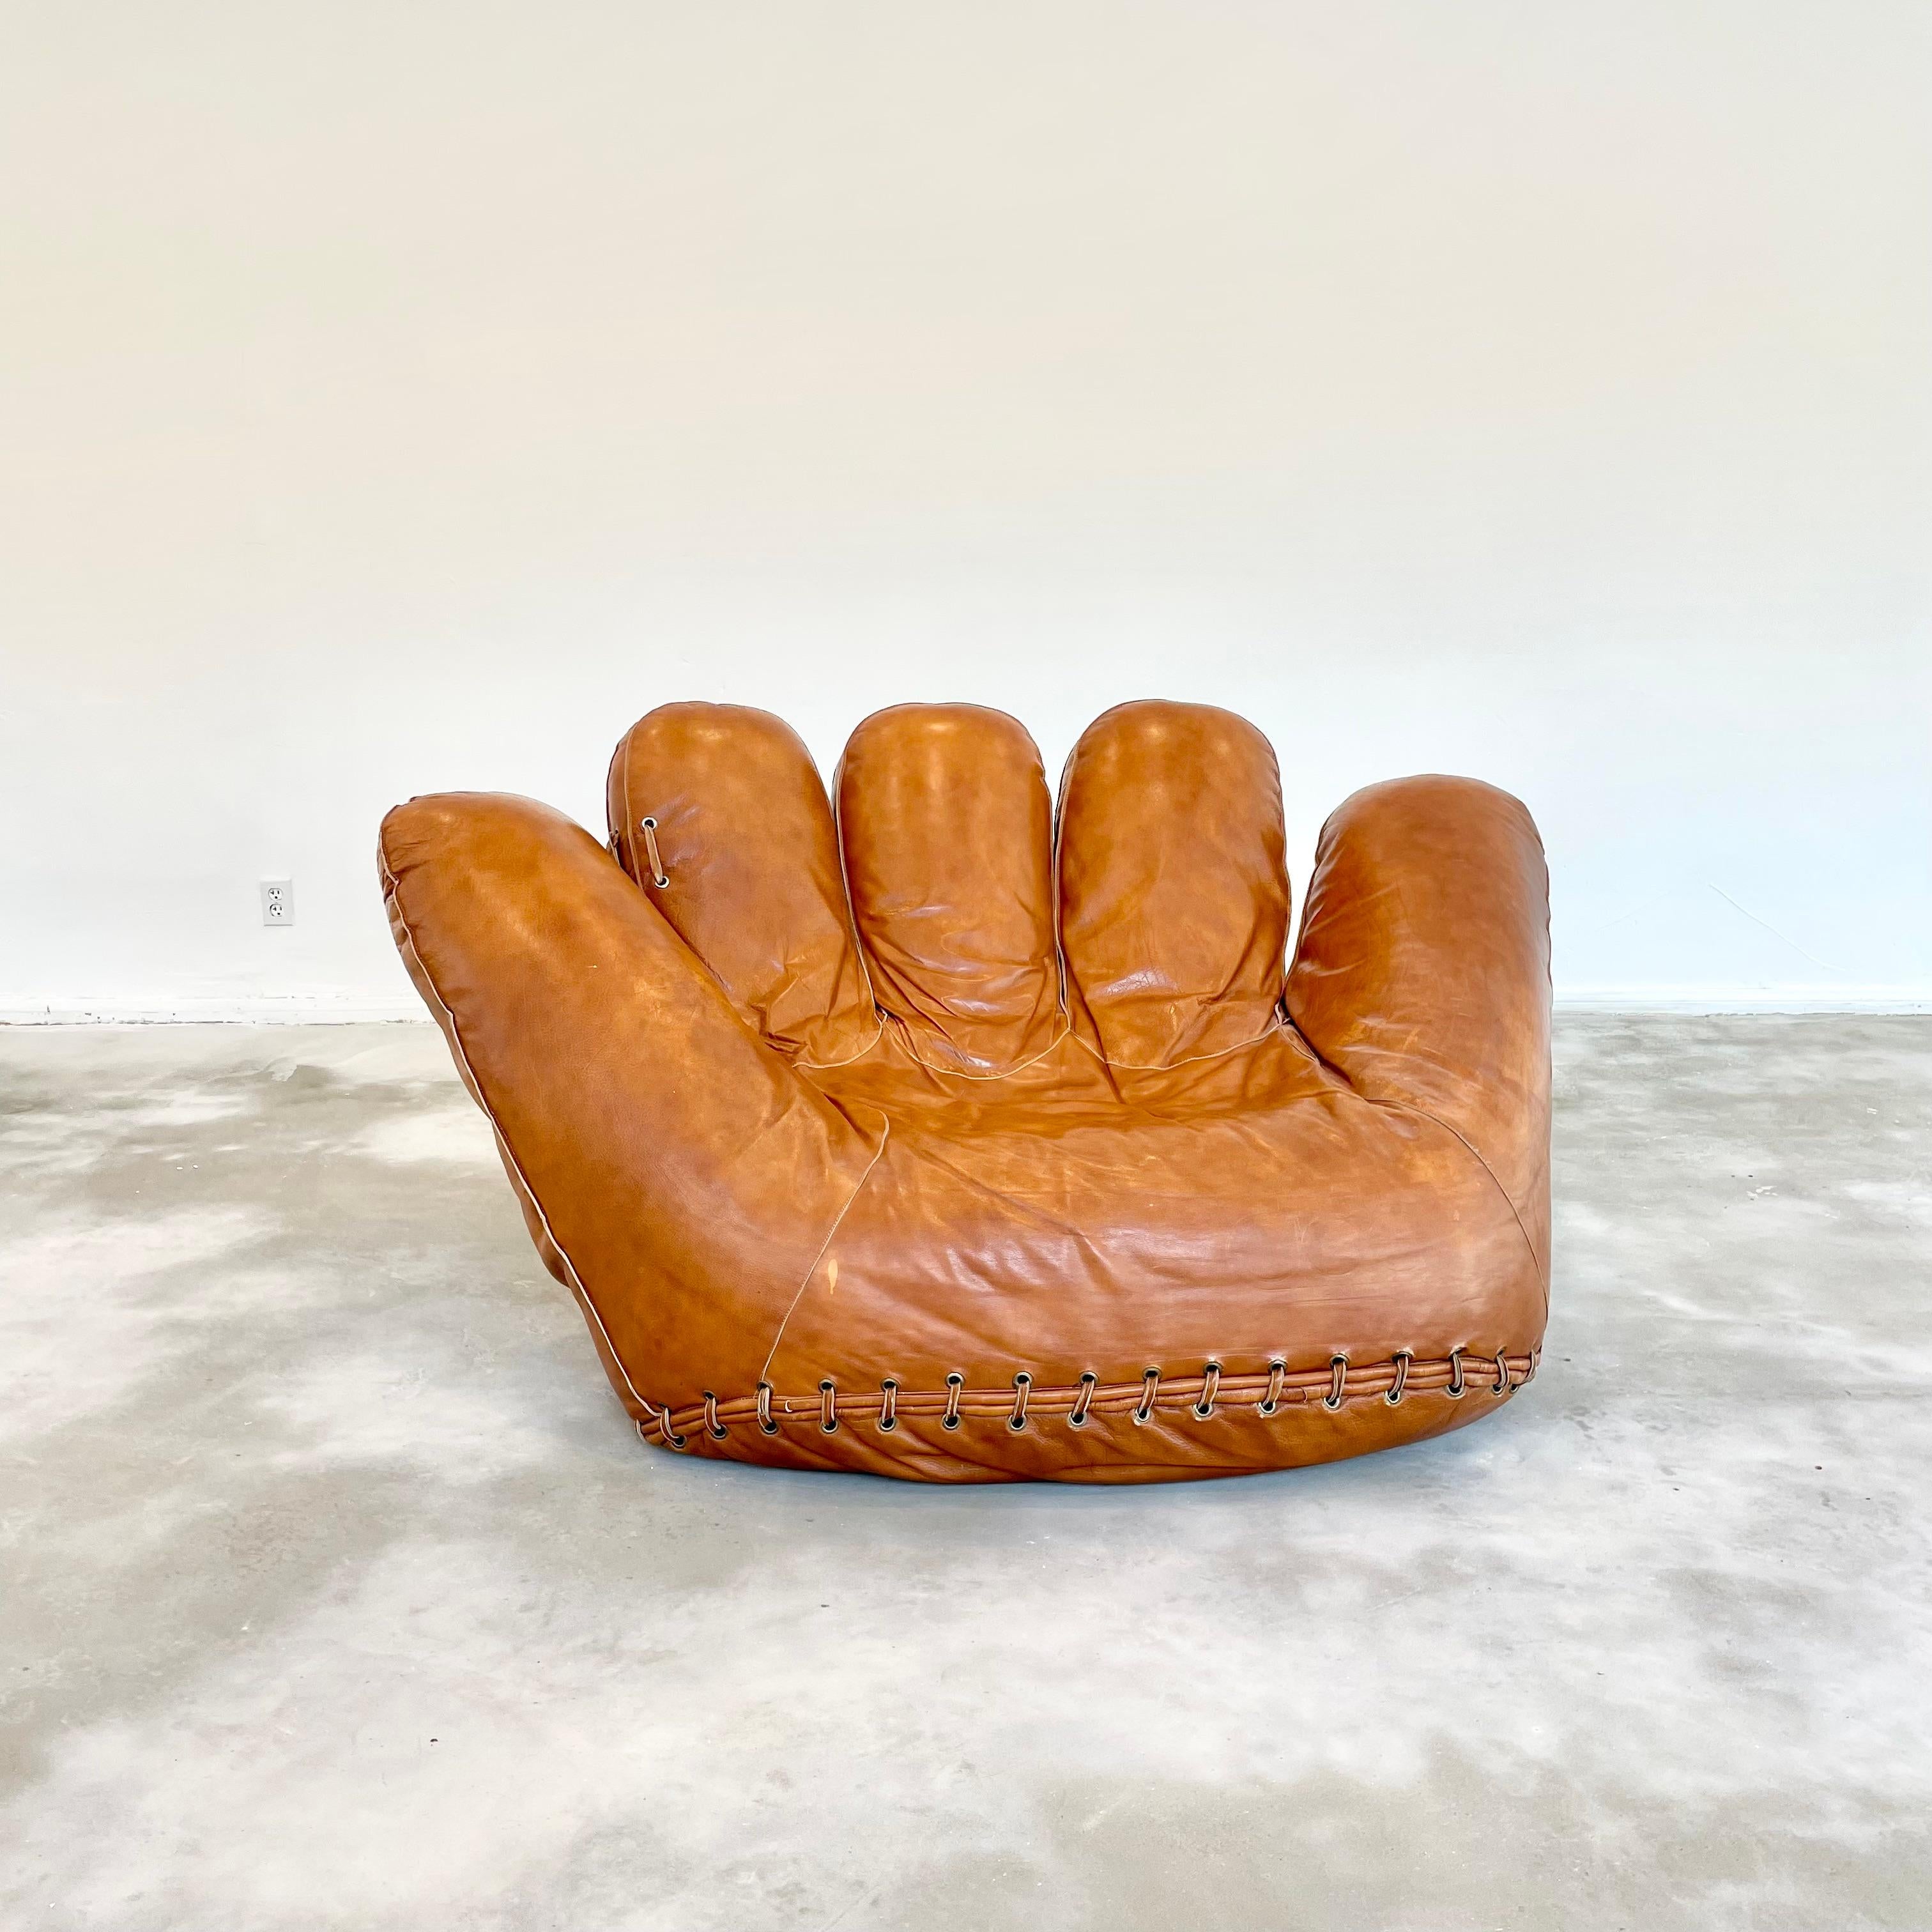 Monumental leather glove chair made for De Sede. Designed by Jonathan De Pas, Donato D'Urbino and Paolo Lomazzi in the 1970's. Signed by all three designers with De Sede lettering. Foam chair completely covered in rich saddle leather. Beautiful